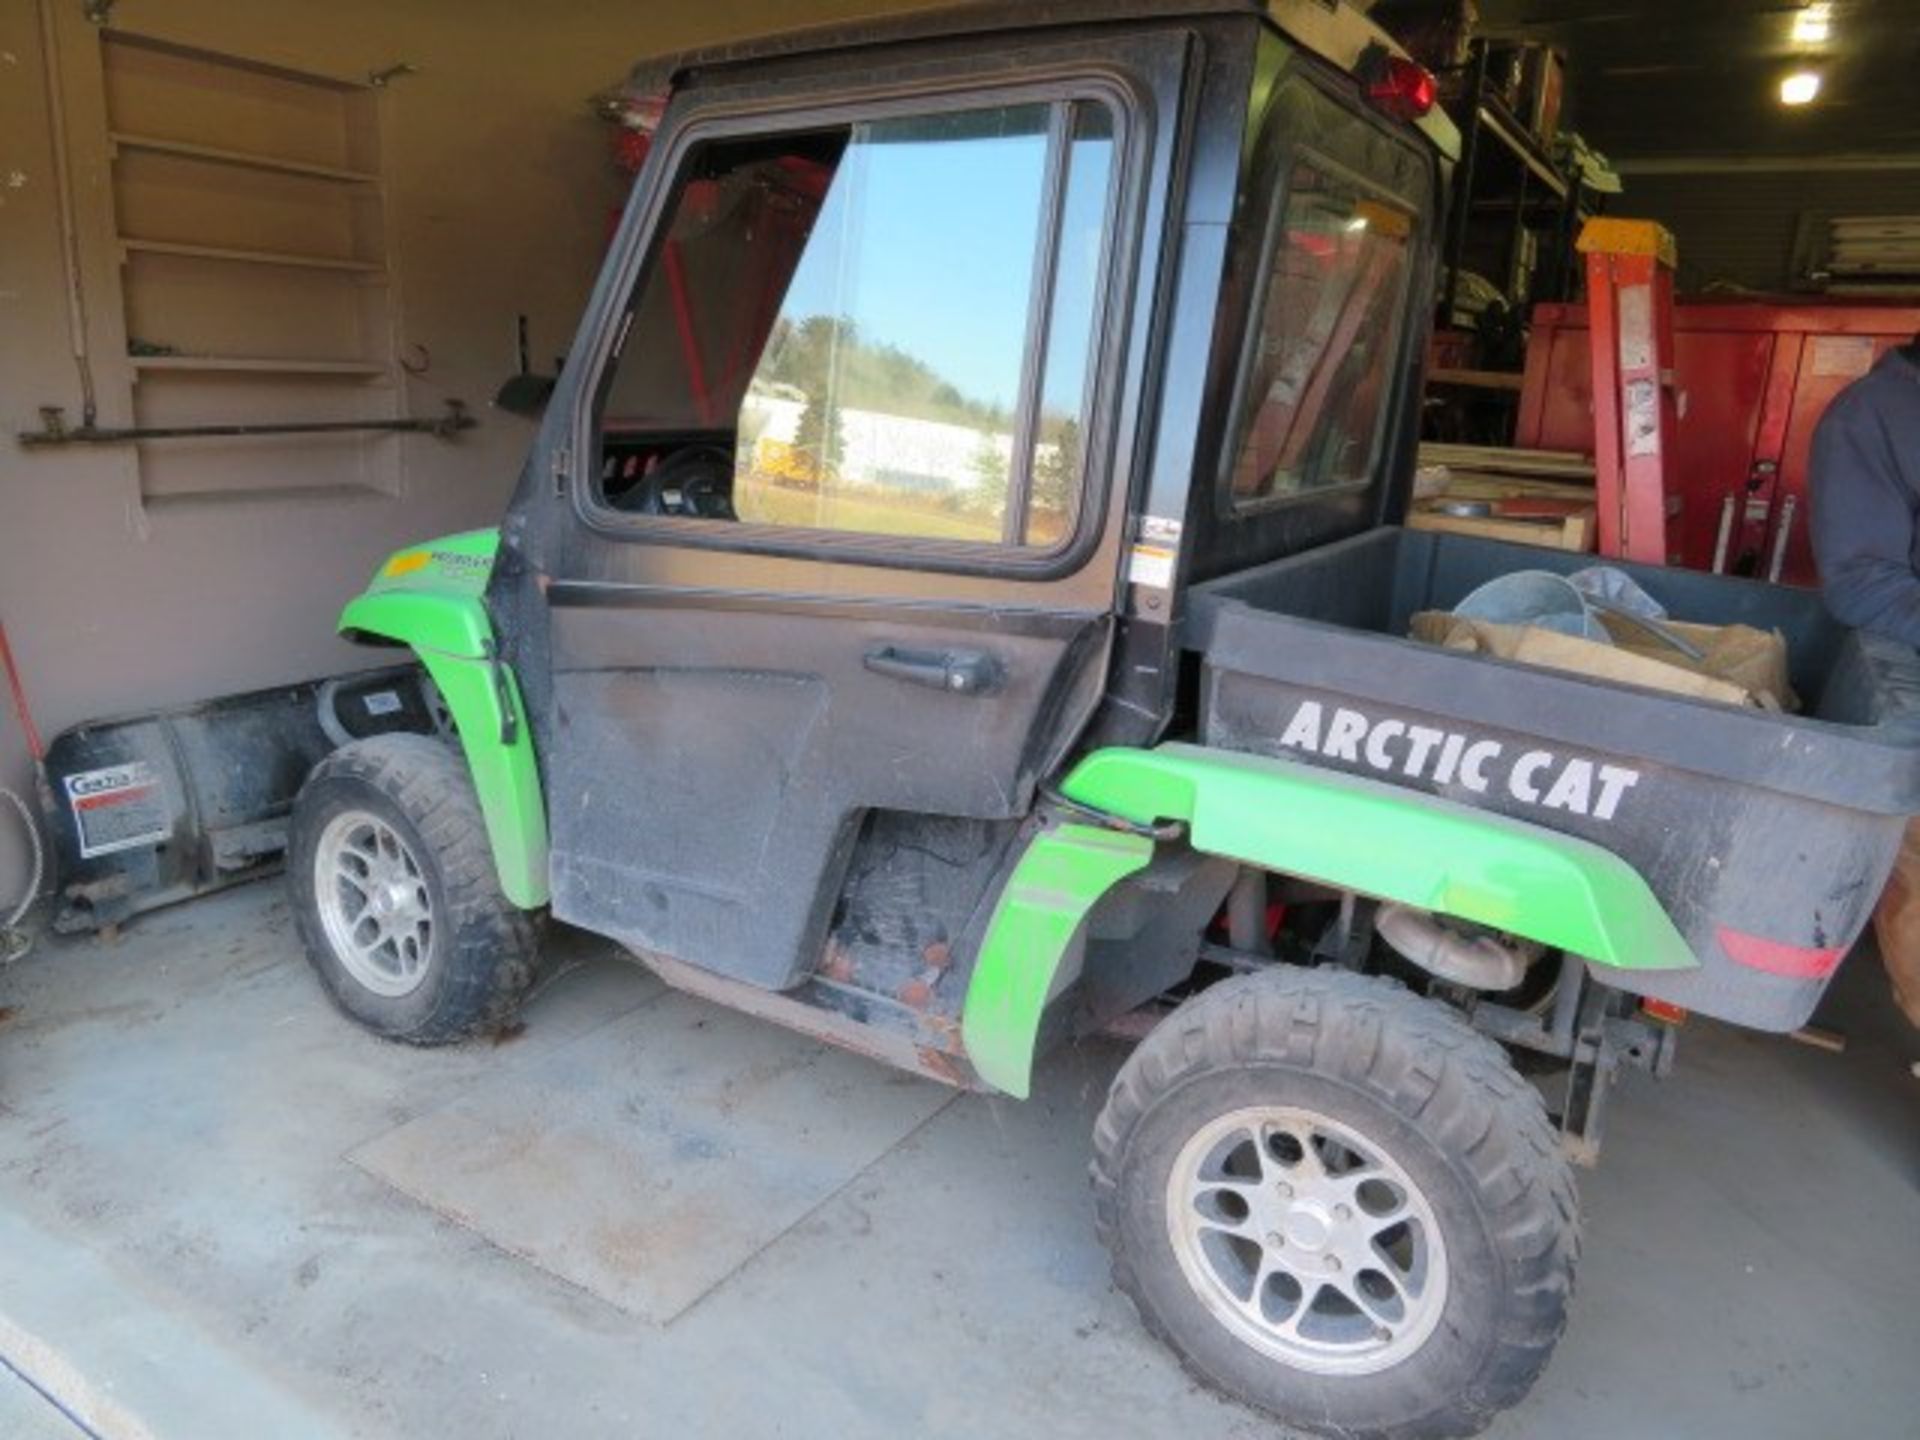 2009 ARCTIC CAT PROWLER XT 650 W/ CURTIS SNOW PLOW W/ CONTROL, ENCLOSED CAB & POLY PICK UP BED - Image 2 of 5